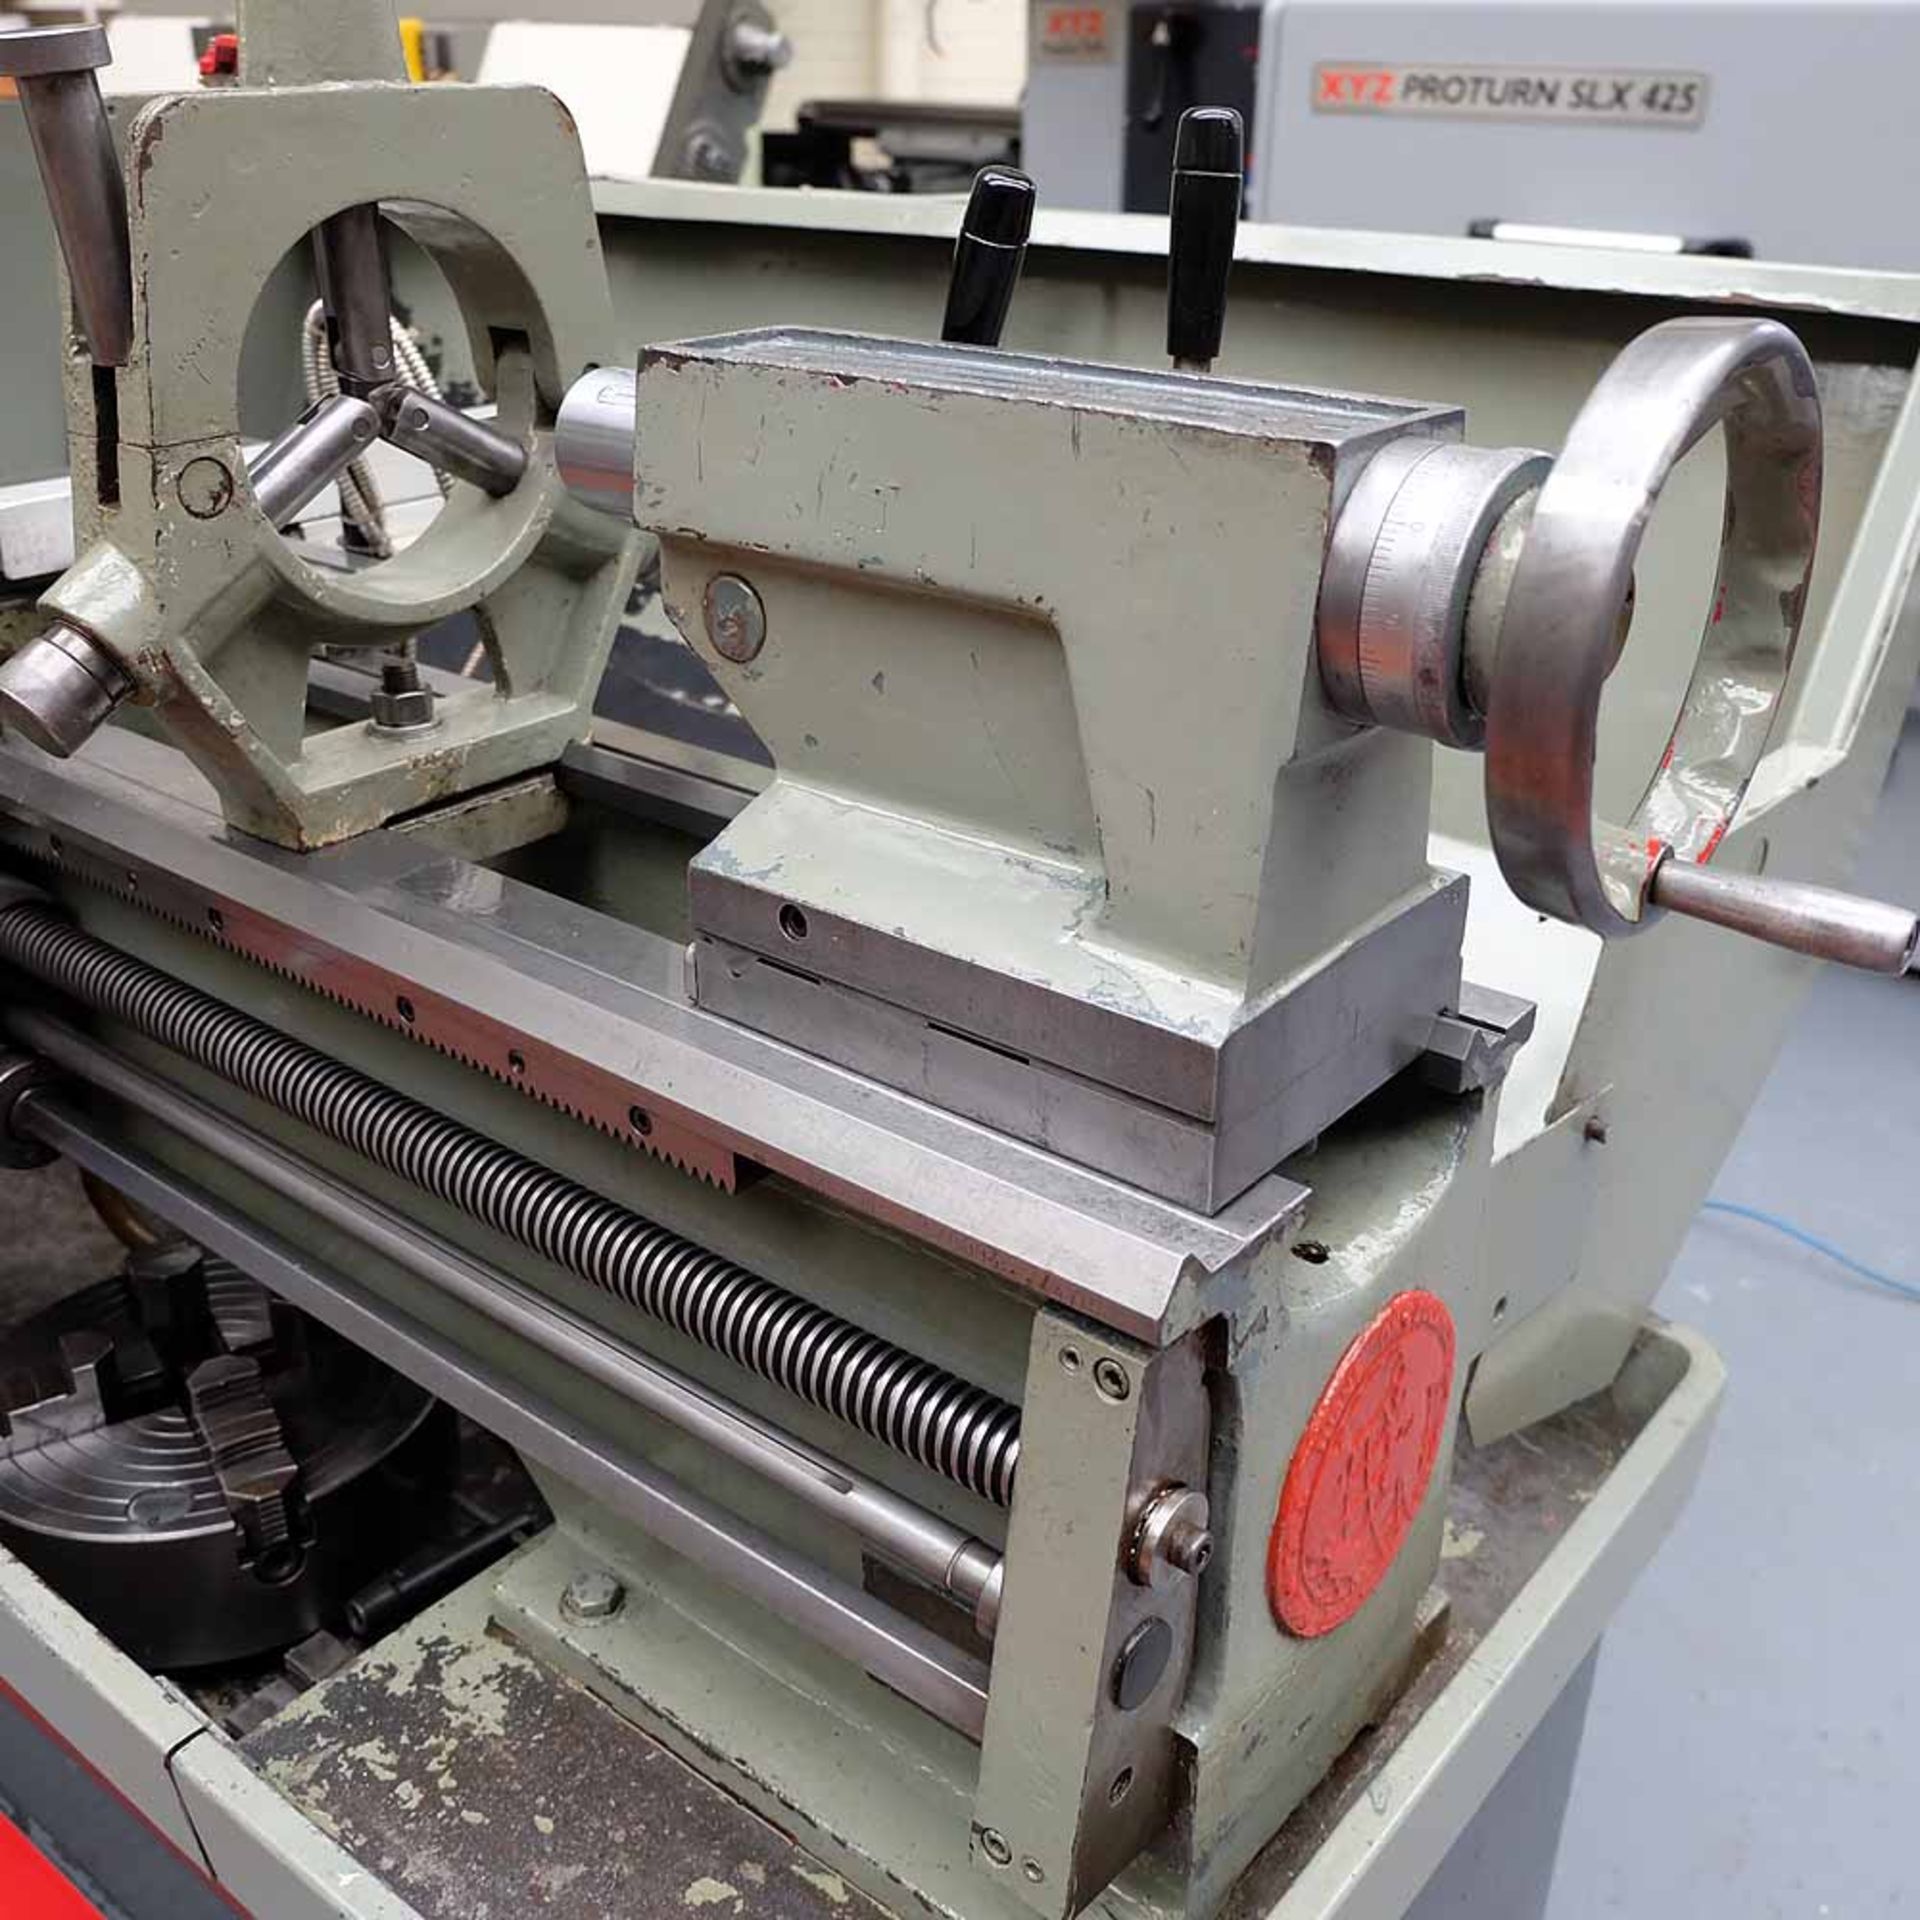 Colchester Master 2500 Gap Bed Centre Lathe. - Image 10 of 13